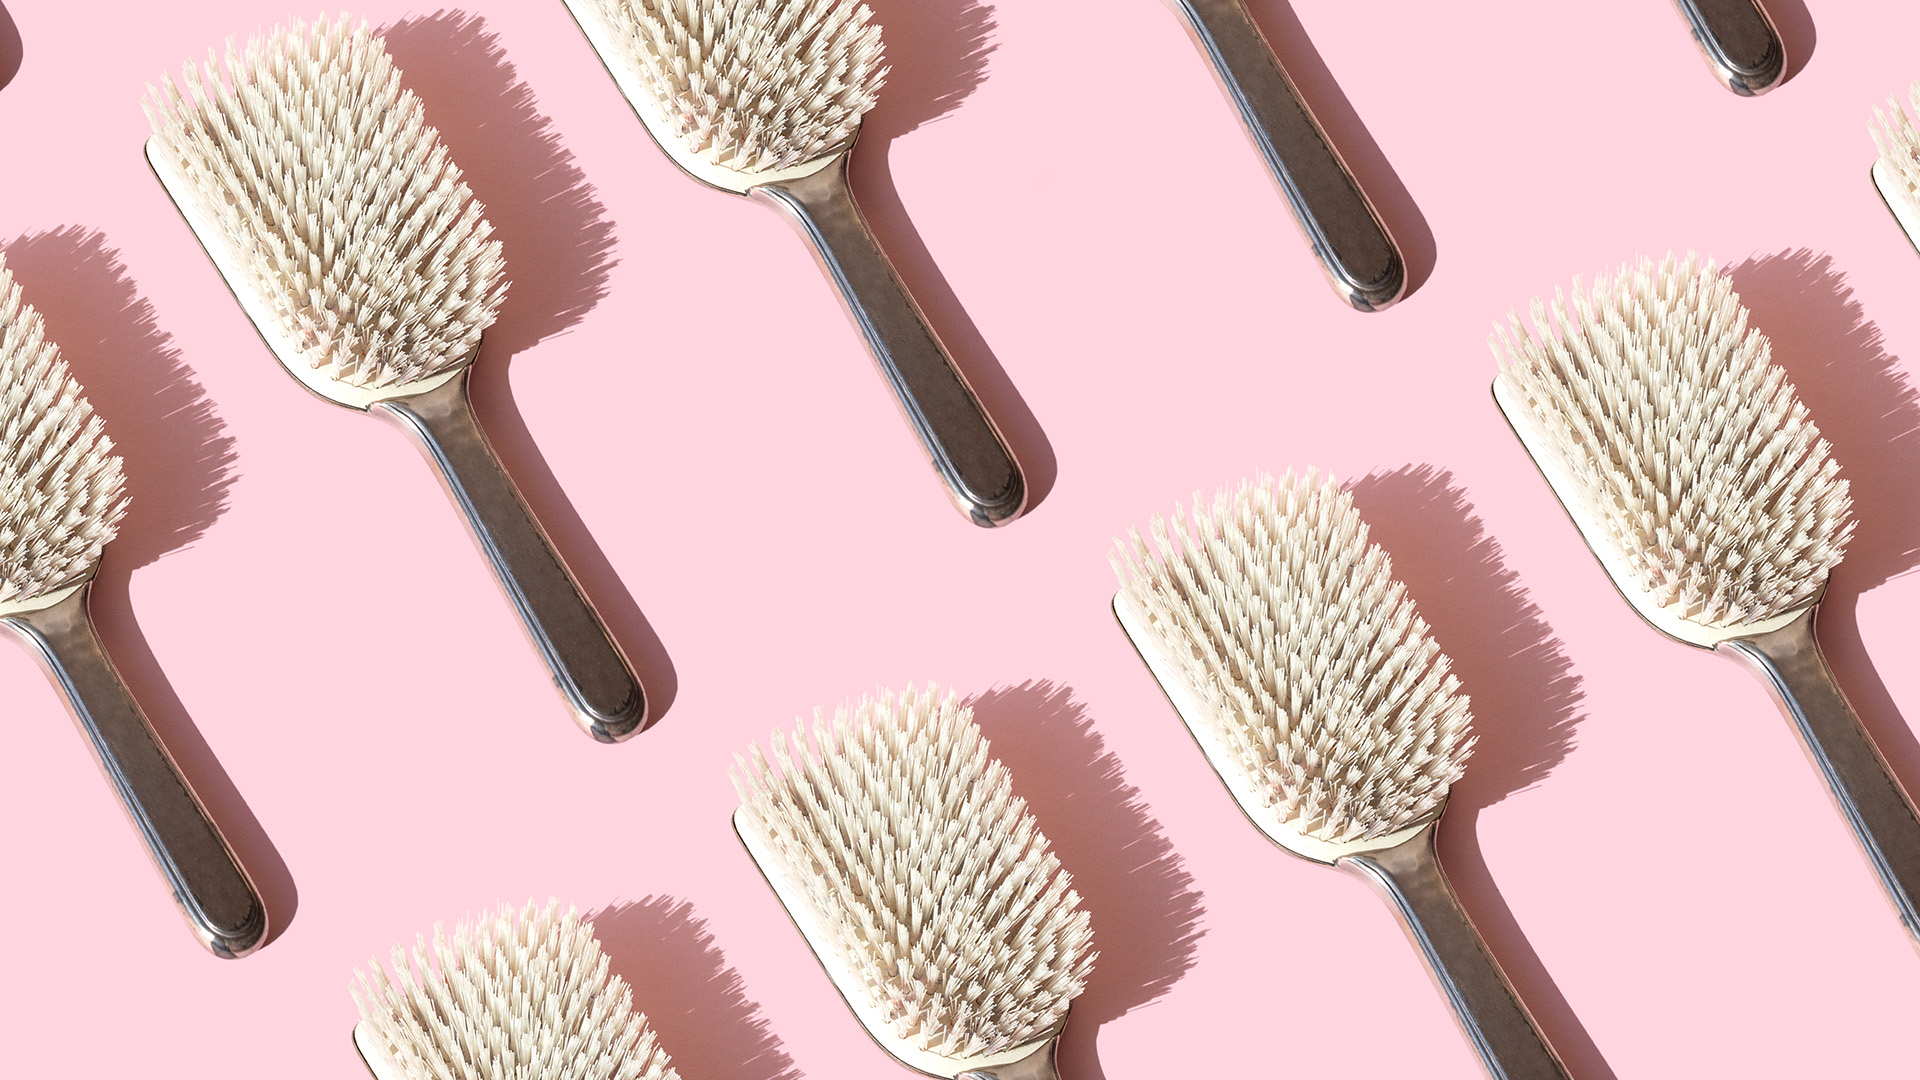 How to clean hairbrushes and combs - in three easy steps | GoodTo